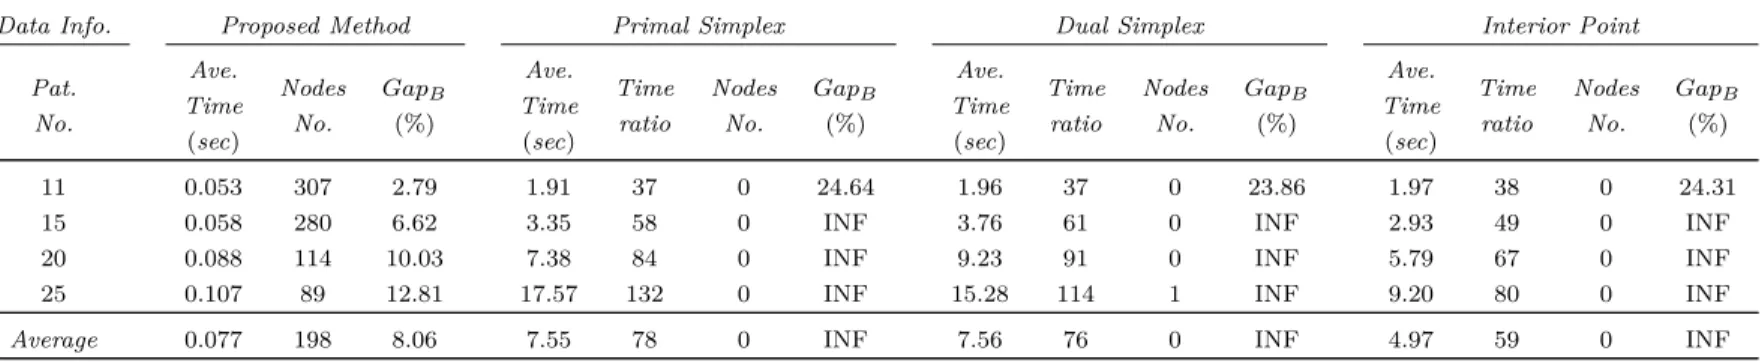 Table 5.5 – Comparison of different solution methods for subproblems in stochastic operating room scheduling instances within a time limit of 30 minutes.